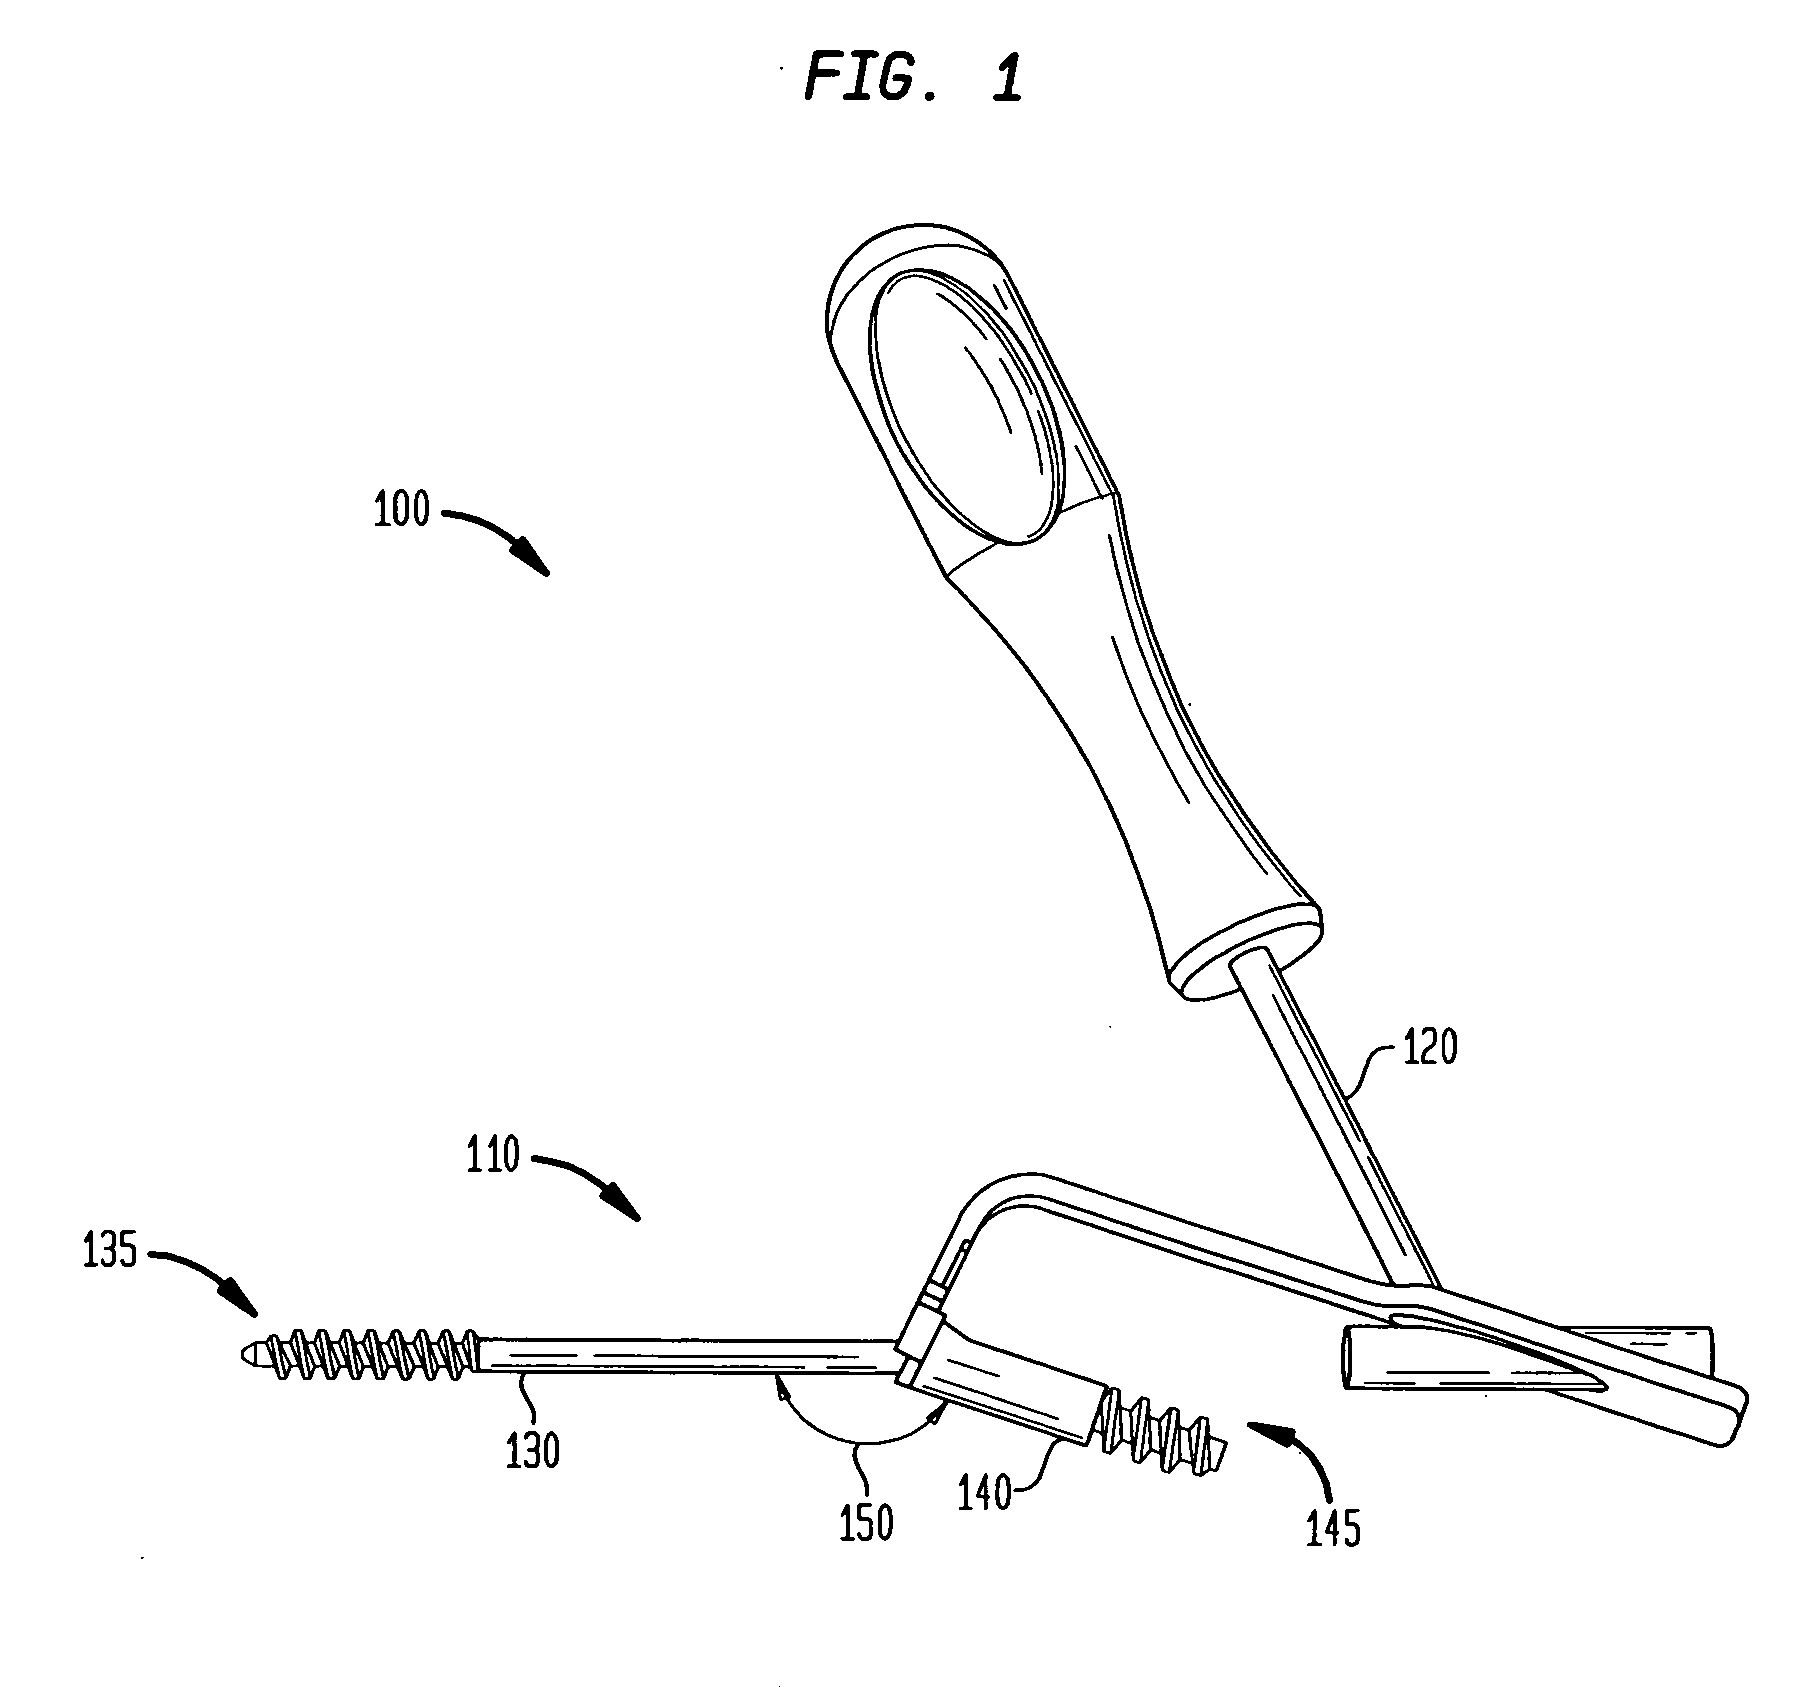 Fixation system, an intramedullary fixation assembly and method of use